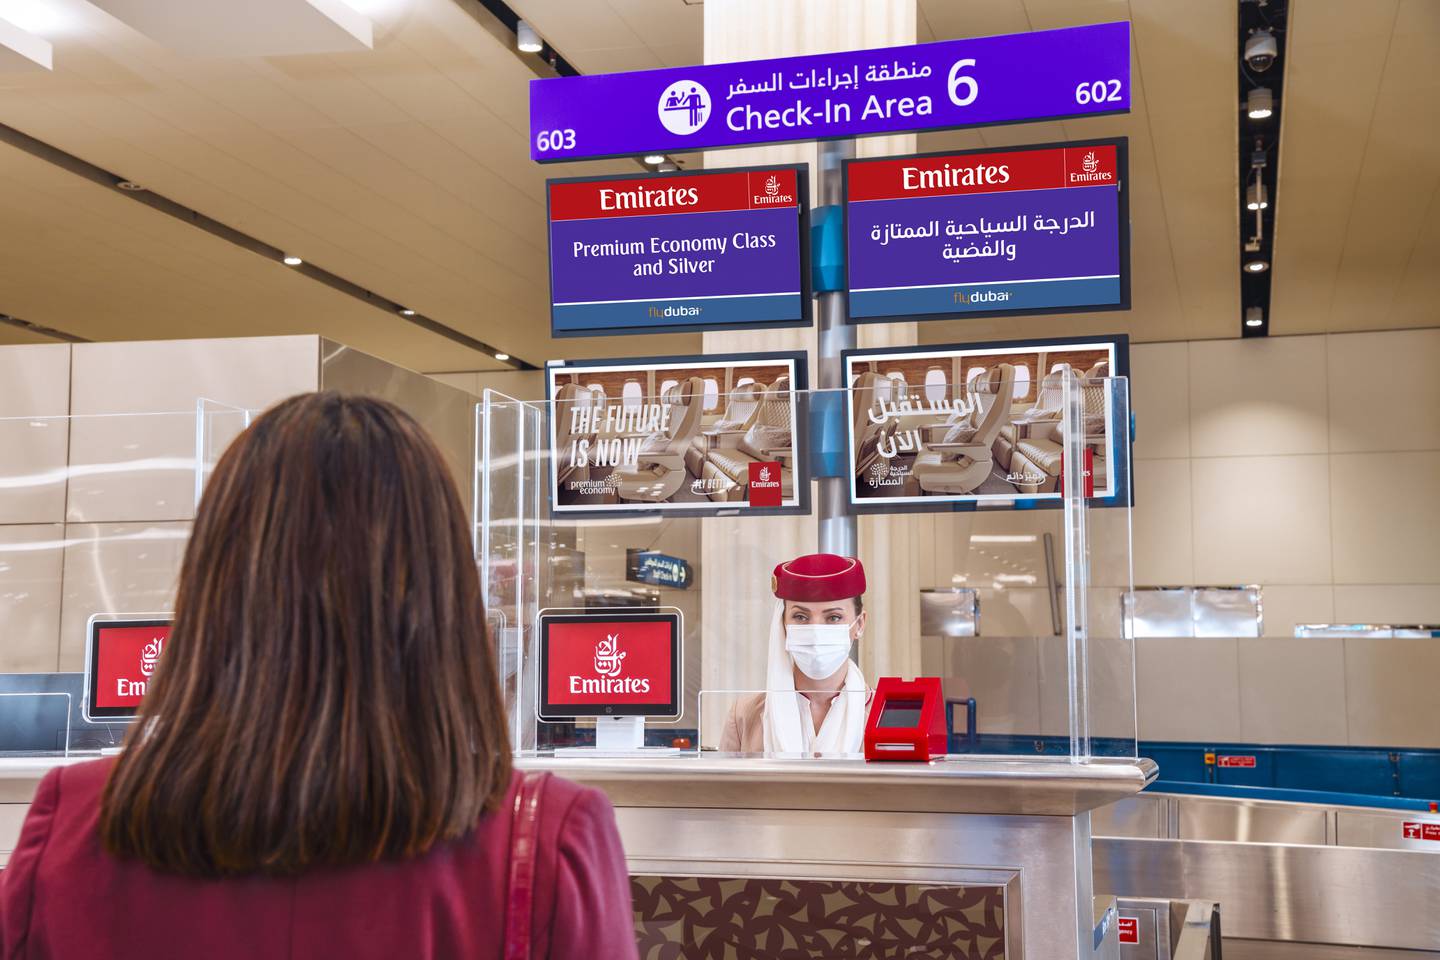 Travellers booking Emirates's premium economy experience will have a dedicated check-in counter at Dubai International to cut down on waiting times. Photo: Emirates